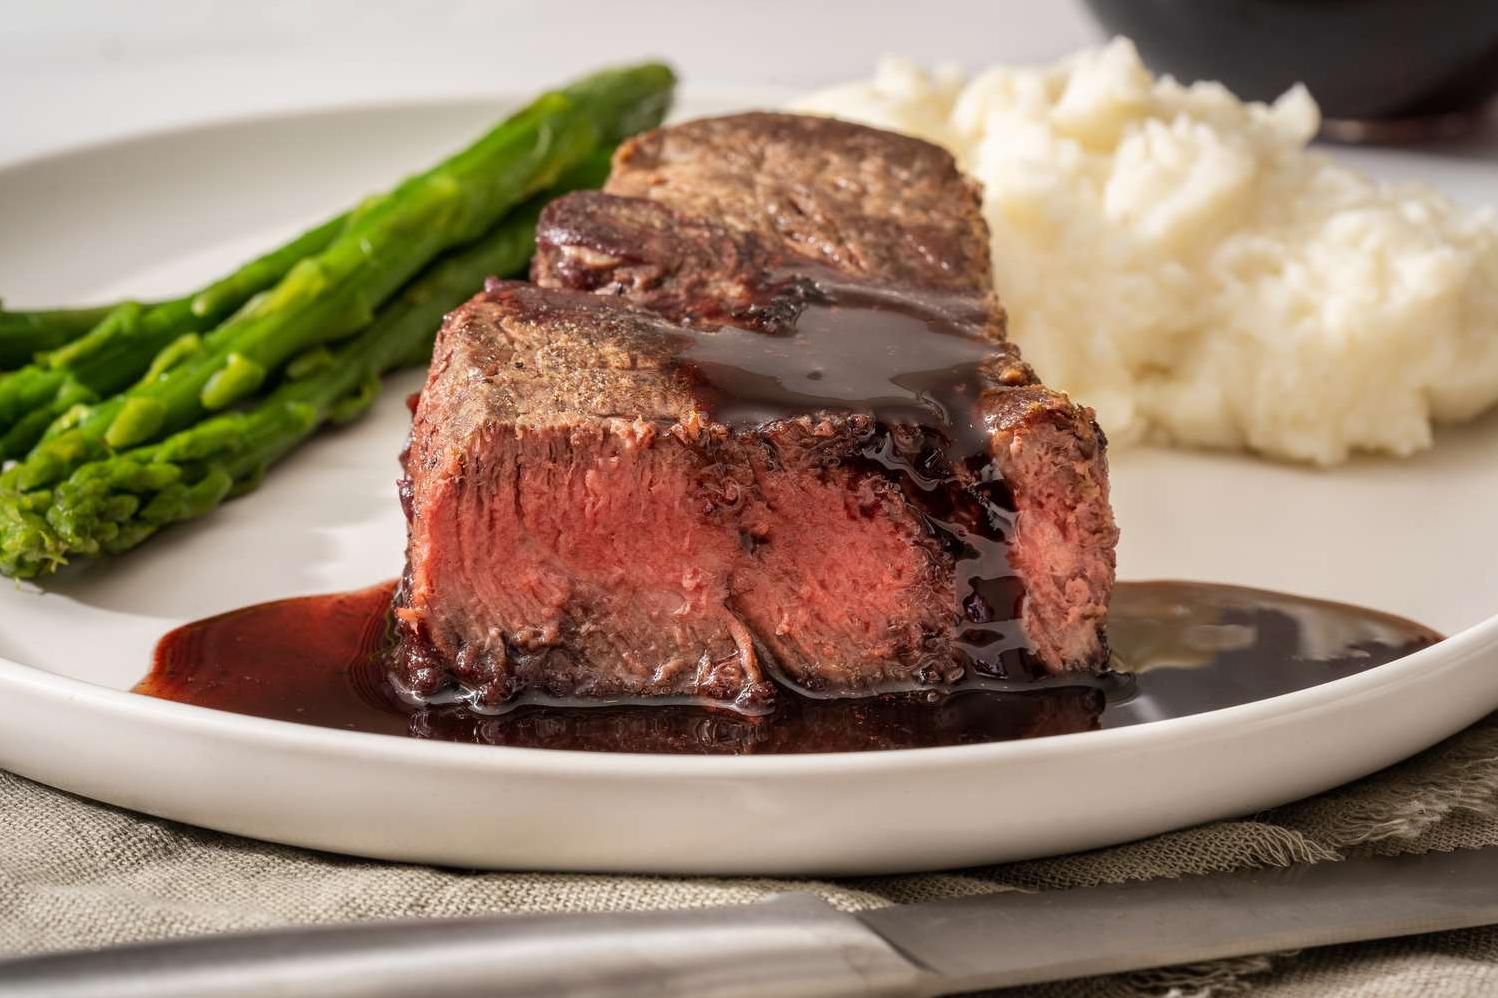  Elevate your at-home cooking with this restaurant-quality beef tenderloin in wine sauce.